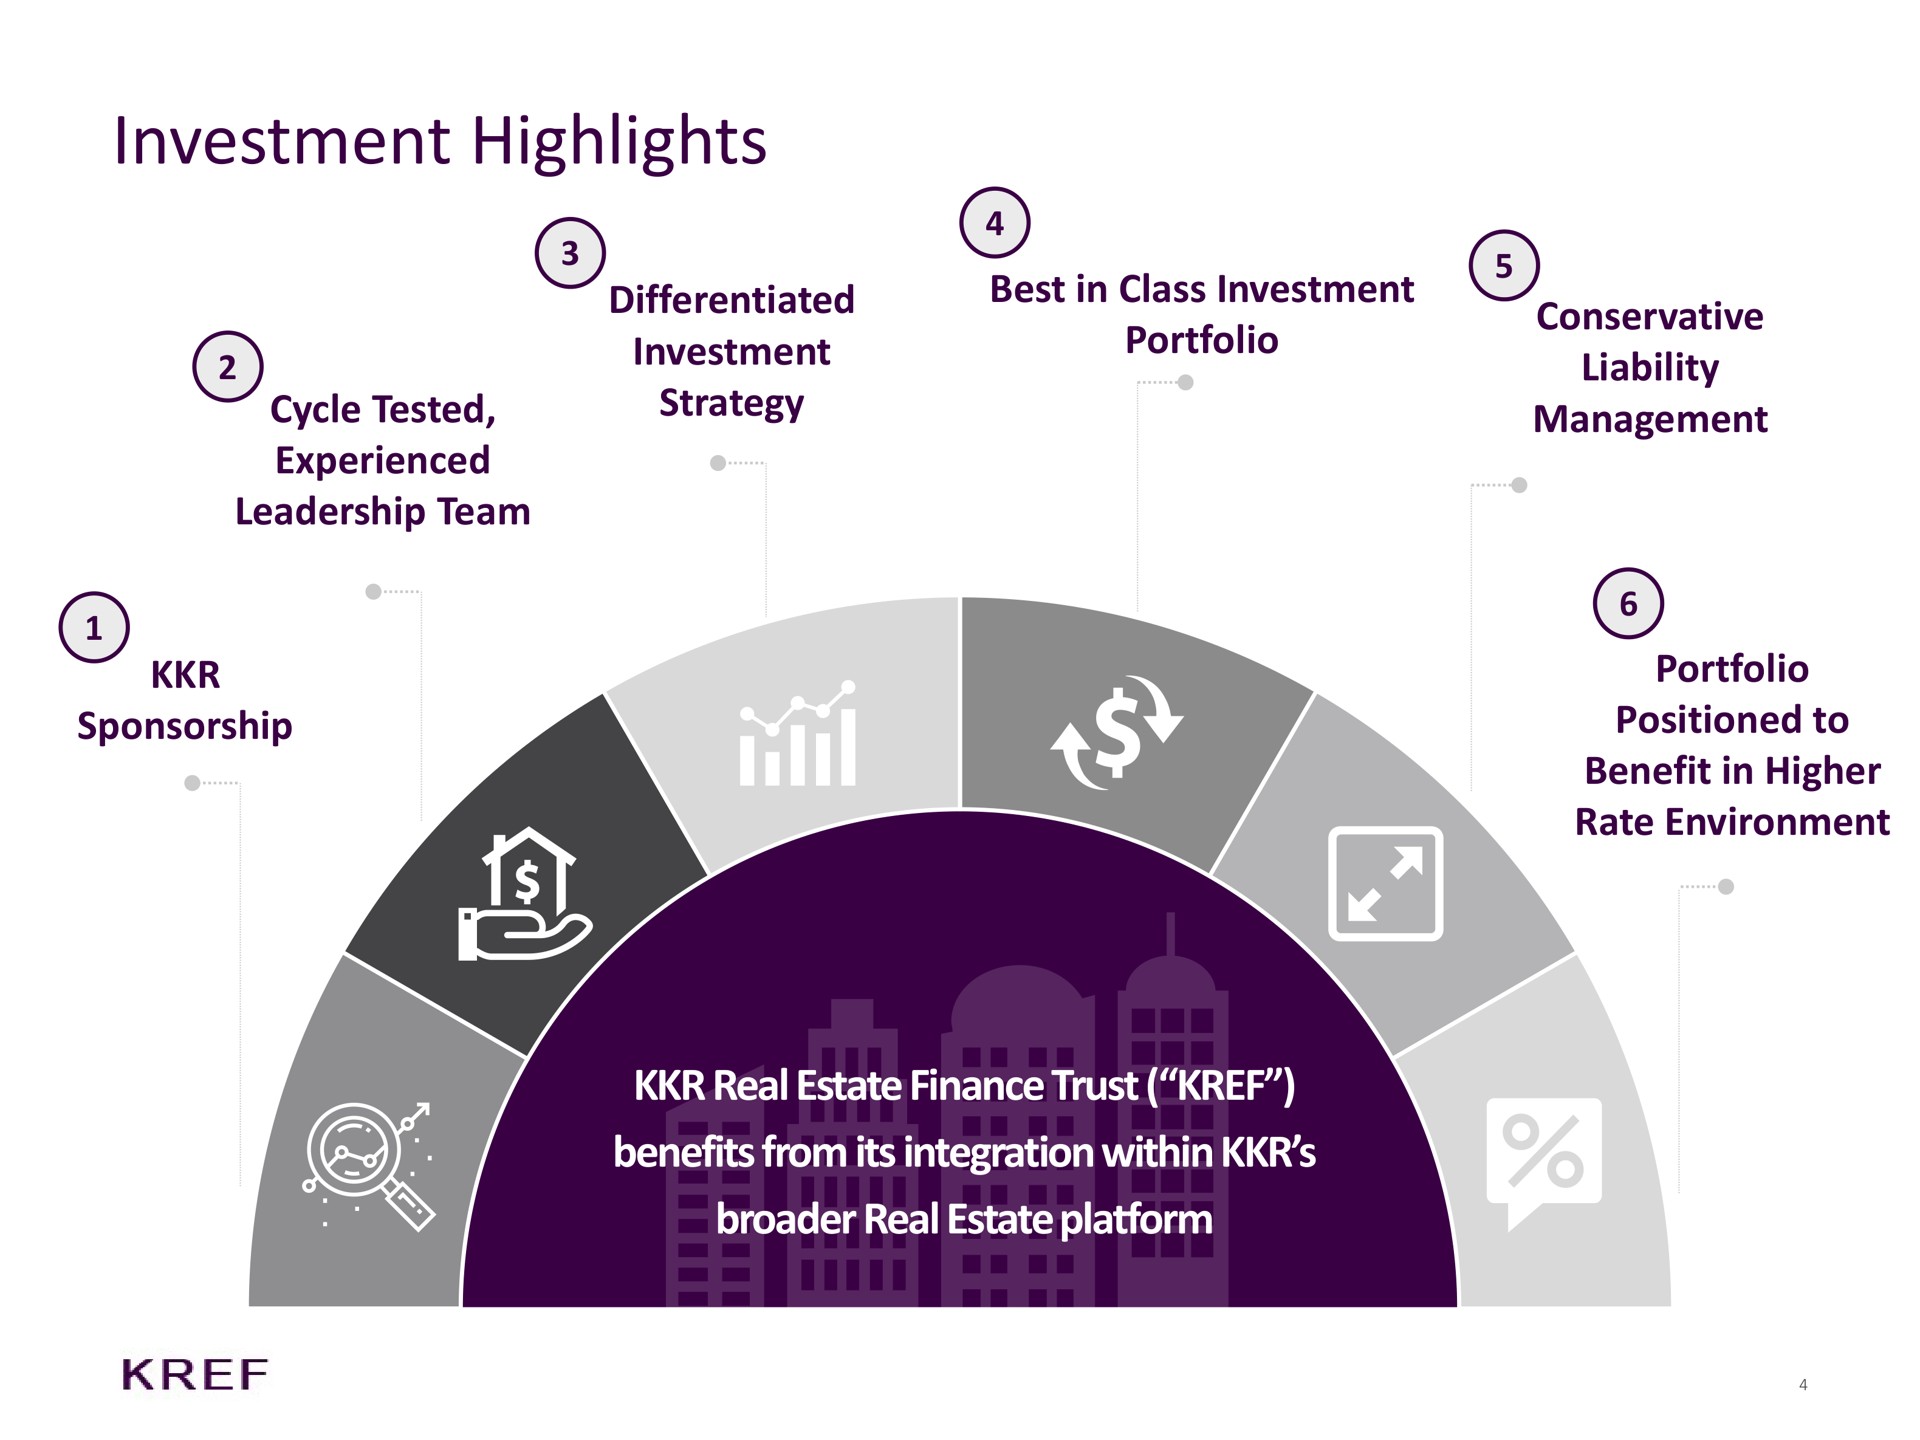 investment highlights cycle tested experienced leadership team sponsorship differentiated investment strategy best in class investment portfolio conservative liability management portfolio positioned to benefit in higher rate environment real estate finance trust benefits from its integration within real estate platform dele adda | KKR Real Estate Finance Trust